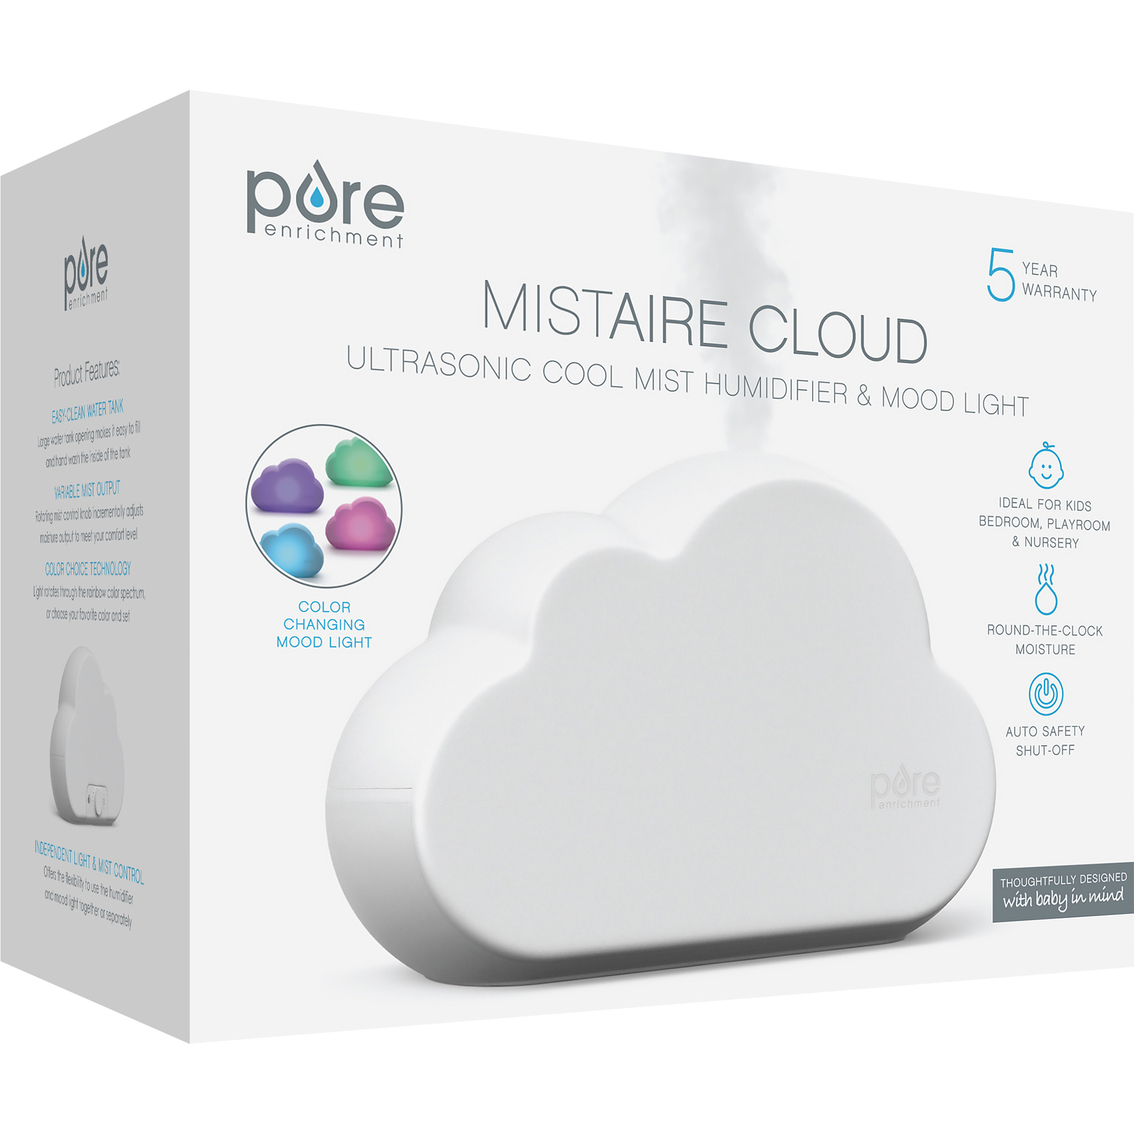 Pure Enrichment MistAire Cloud Ultrasonic Cool Mist Humidifier and Mood Light - Image 6 of 6